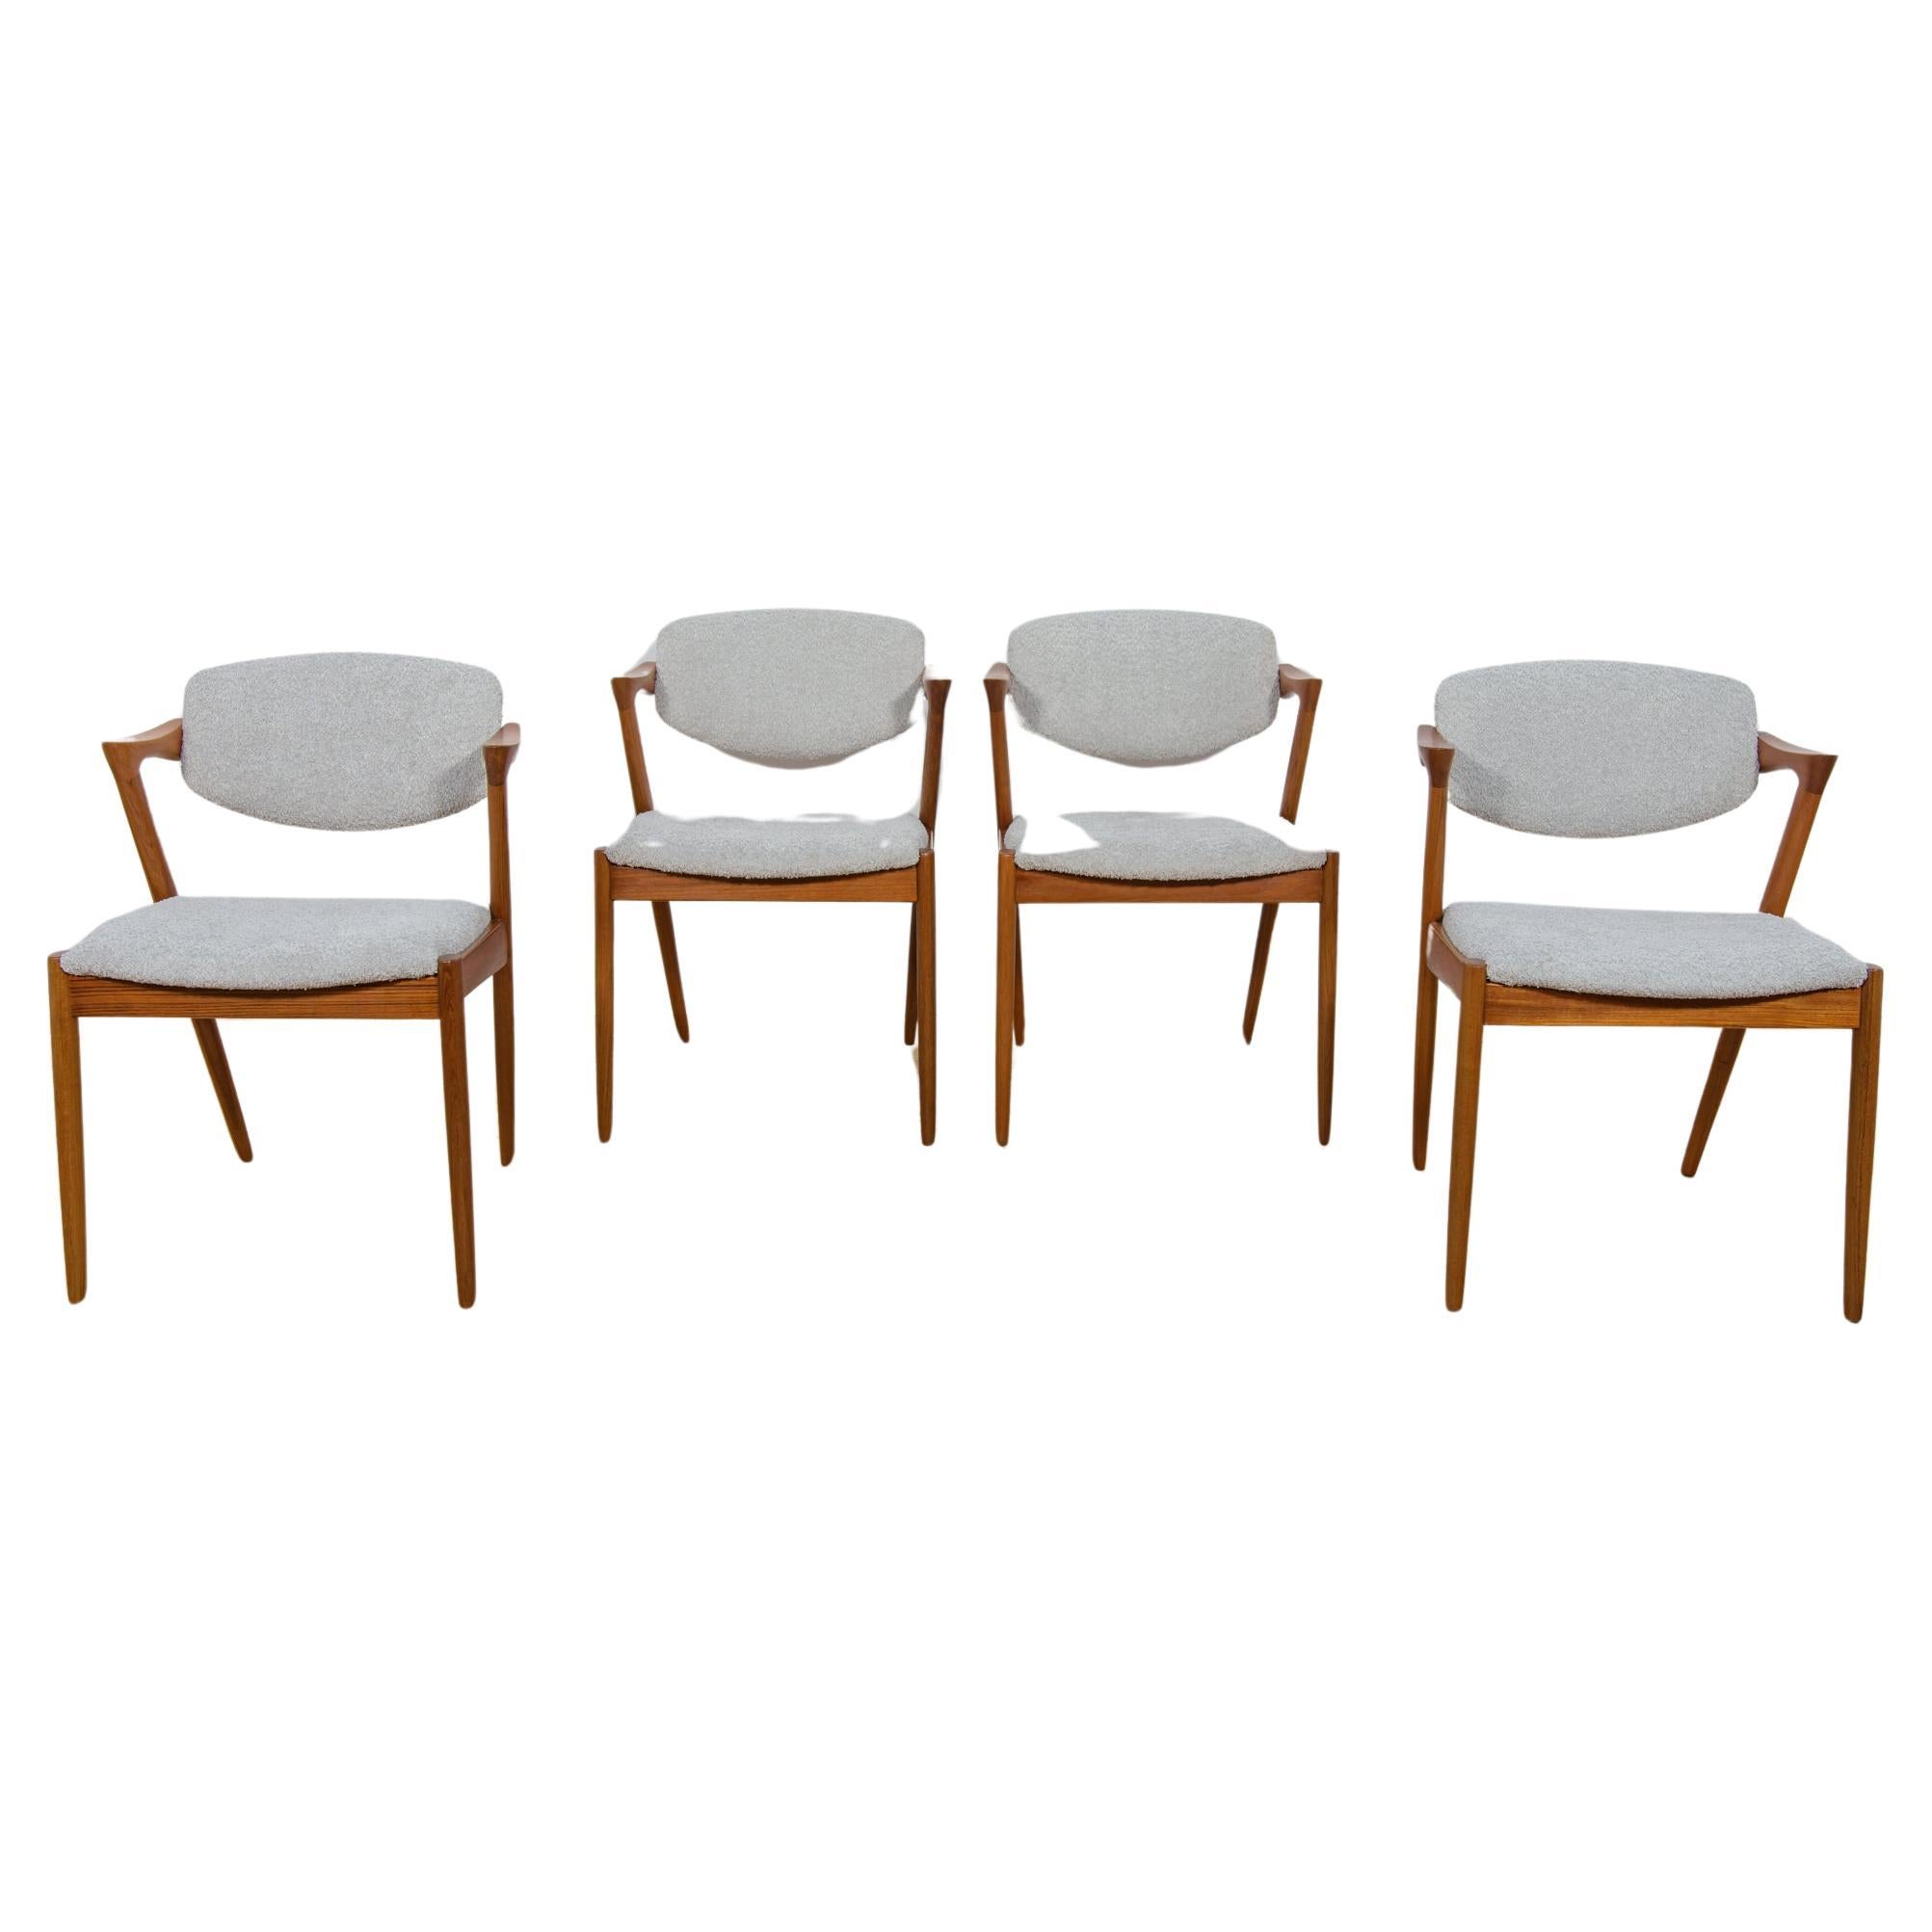 Mid-Century Teak Model 42 Dining Chairs by Kai Kristiansen for Schou Andersen. For Sale